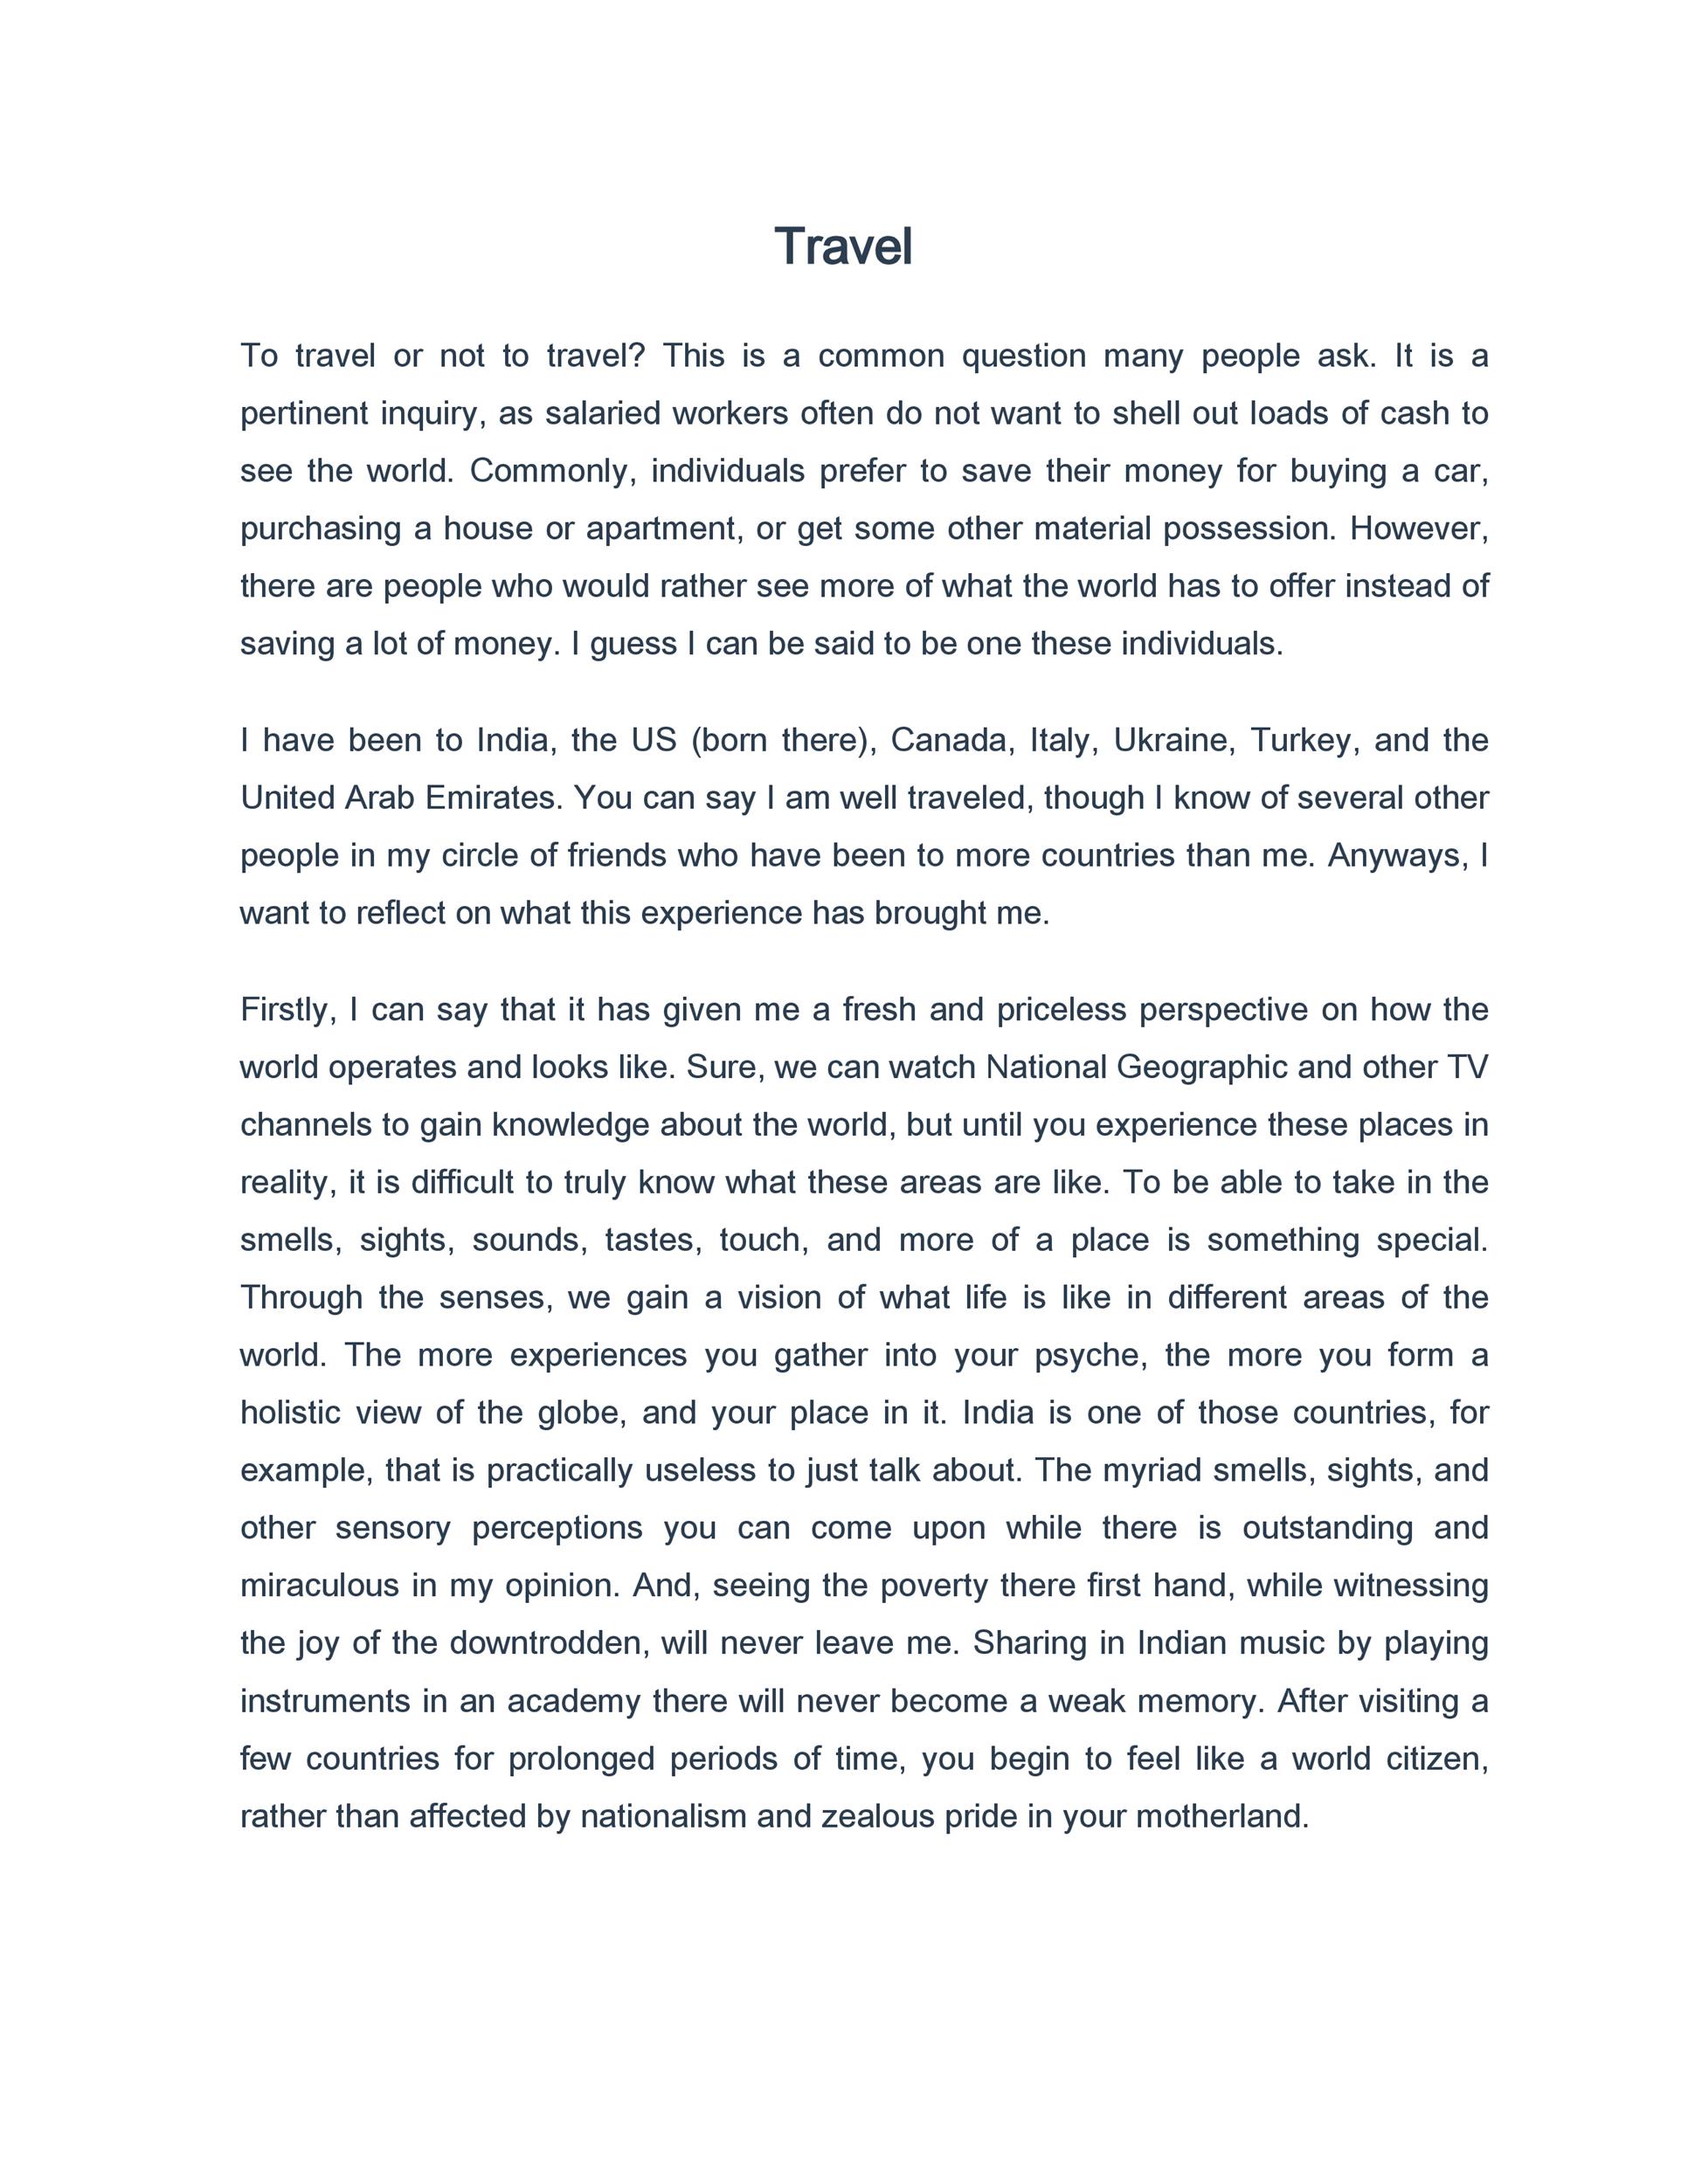 self learning experience essay